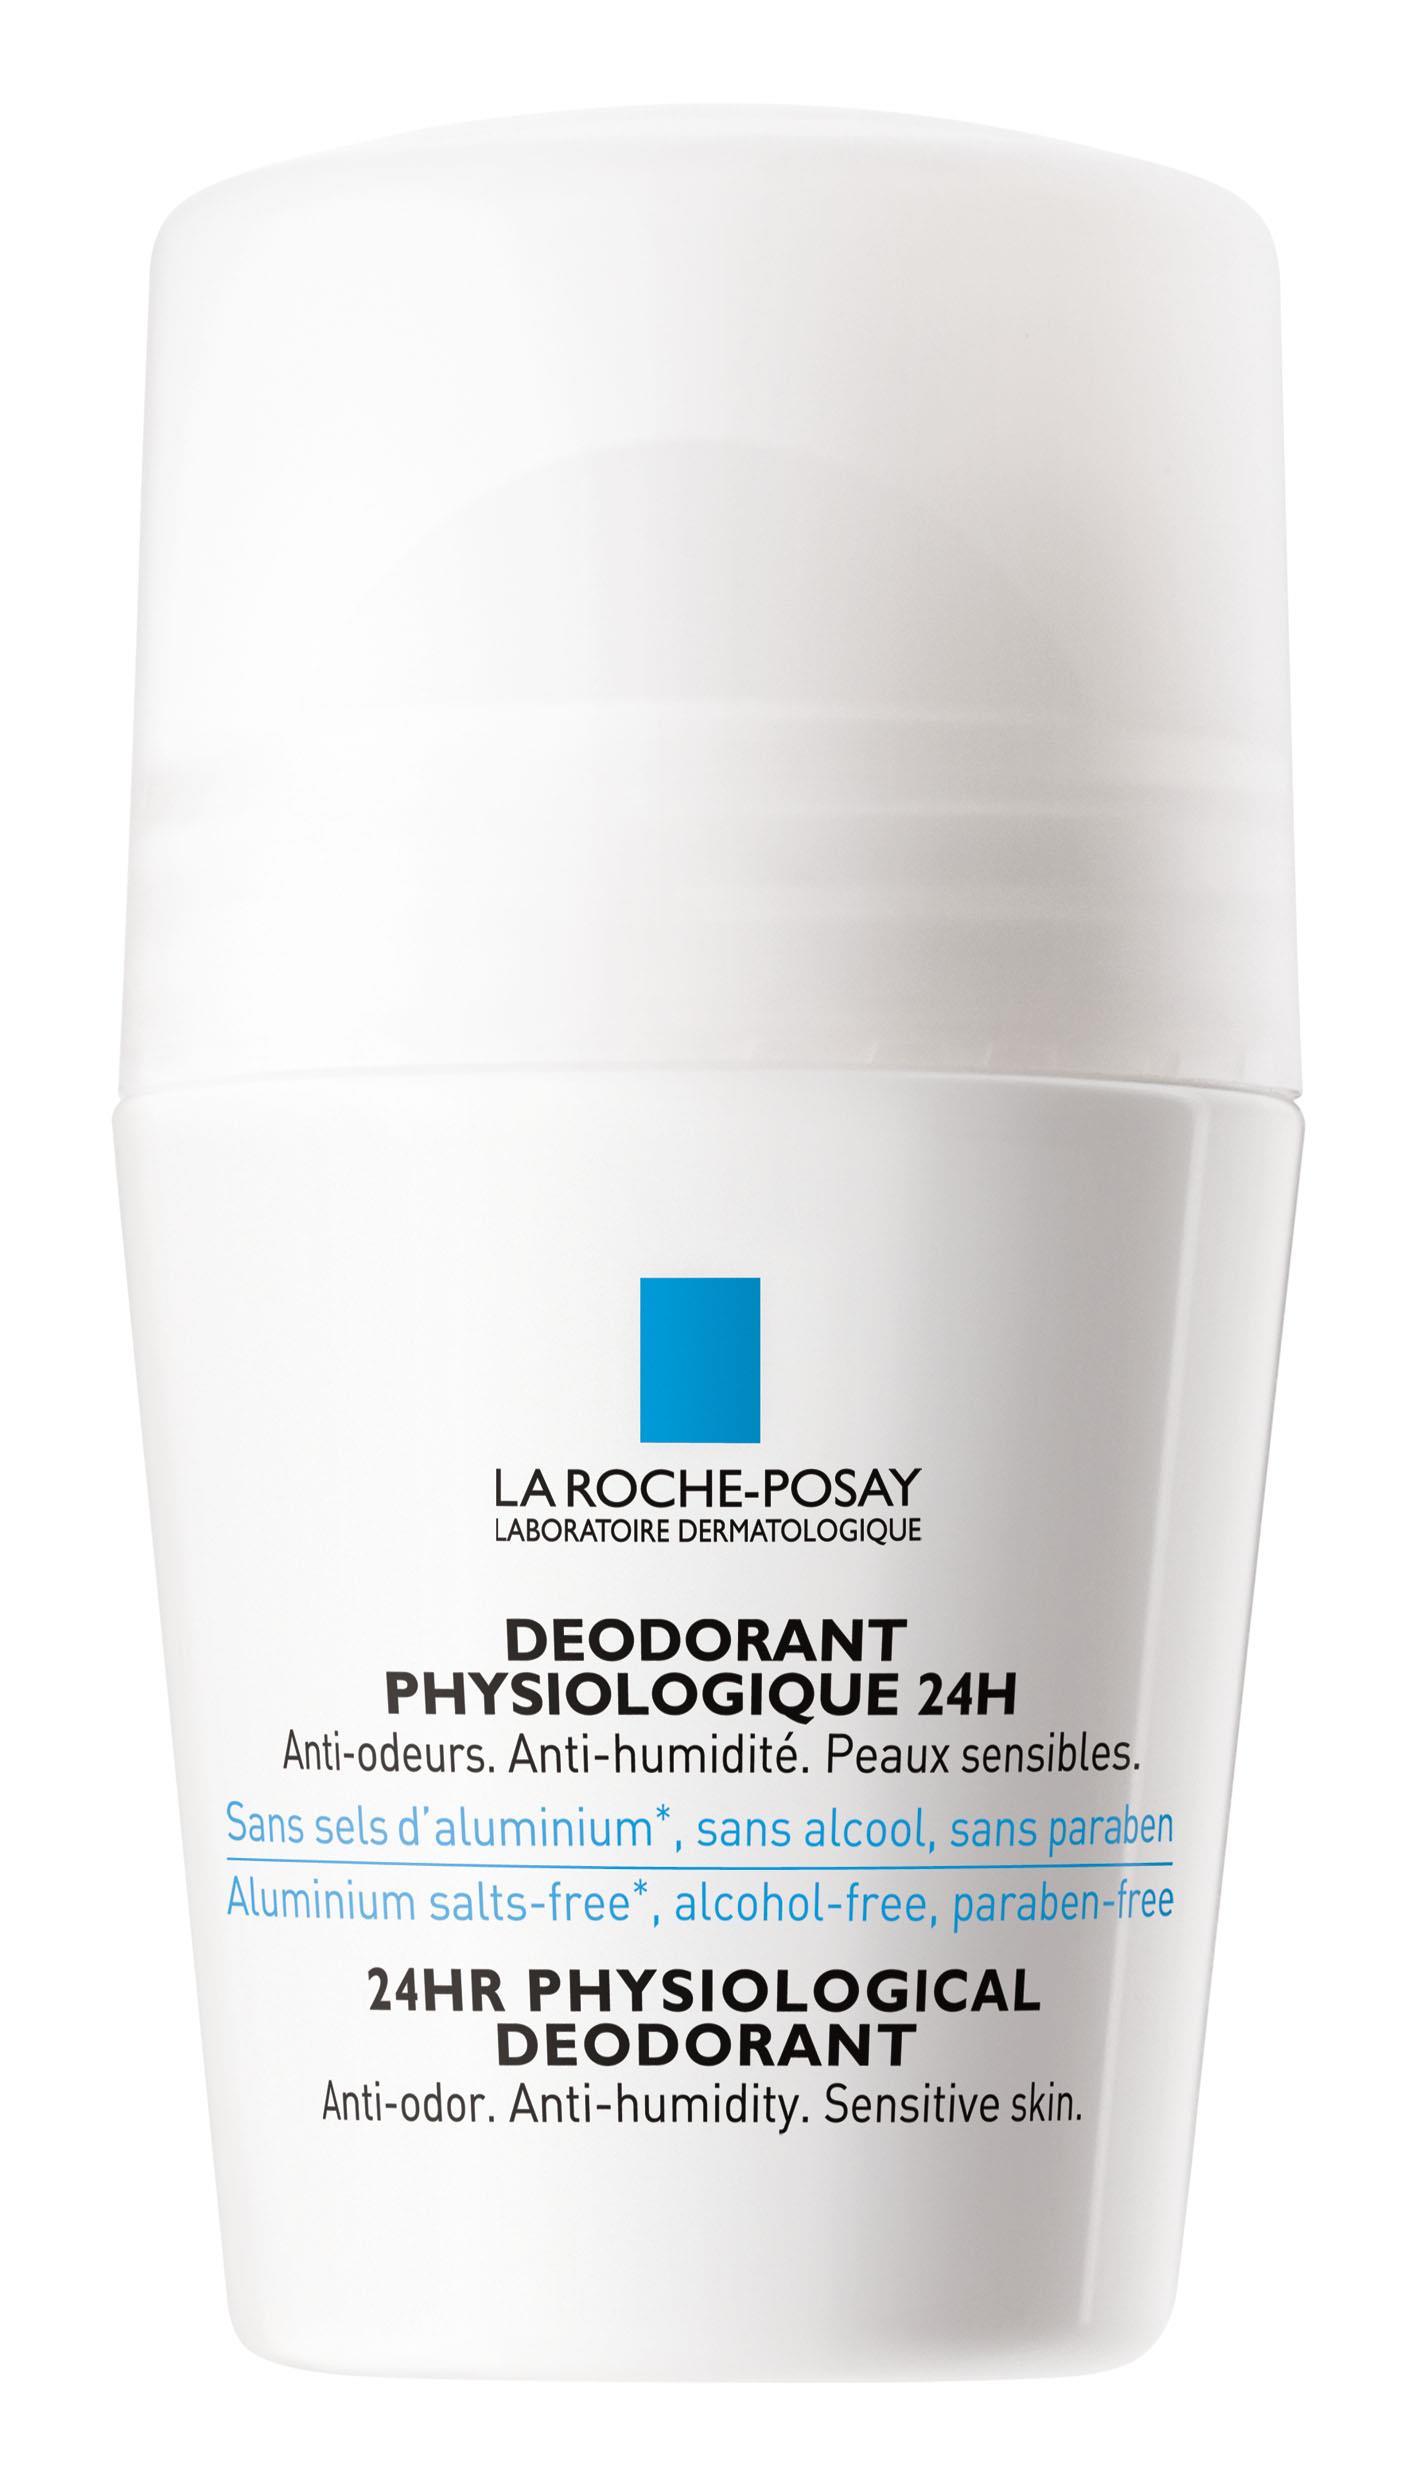 La Roche-Posay Physiologisches Deodorant Roll On